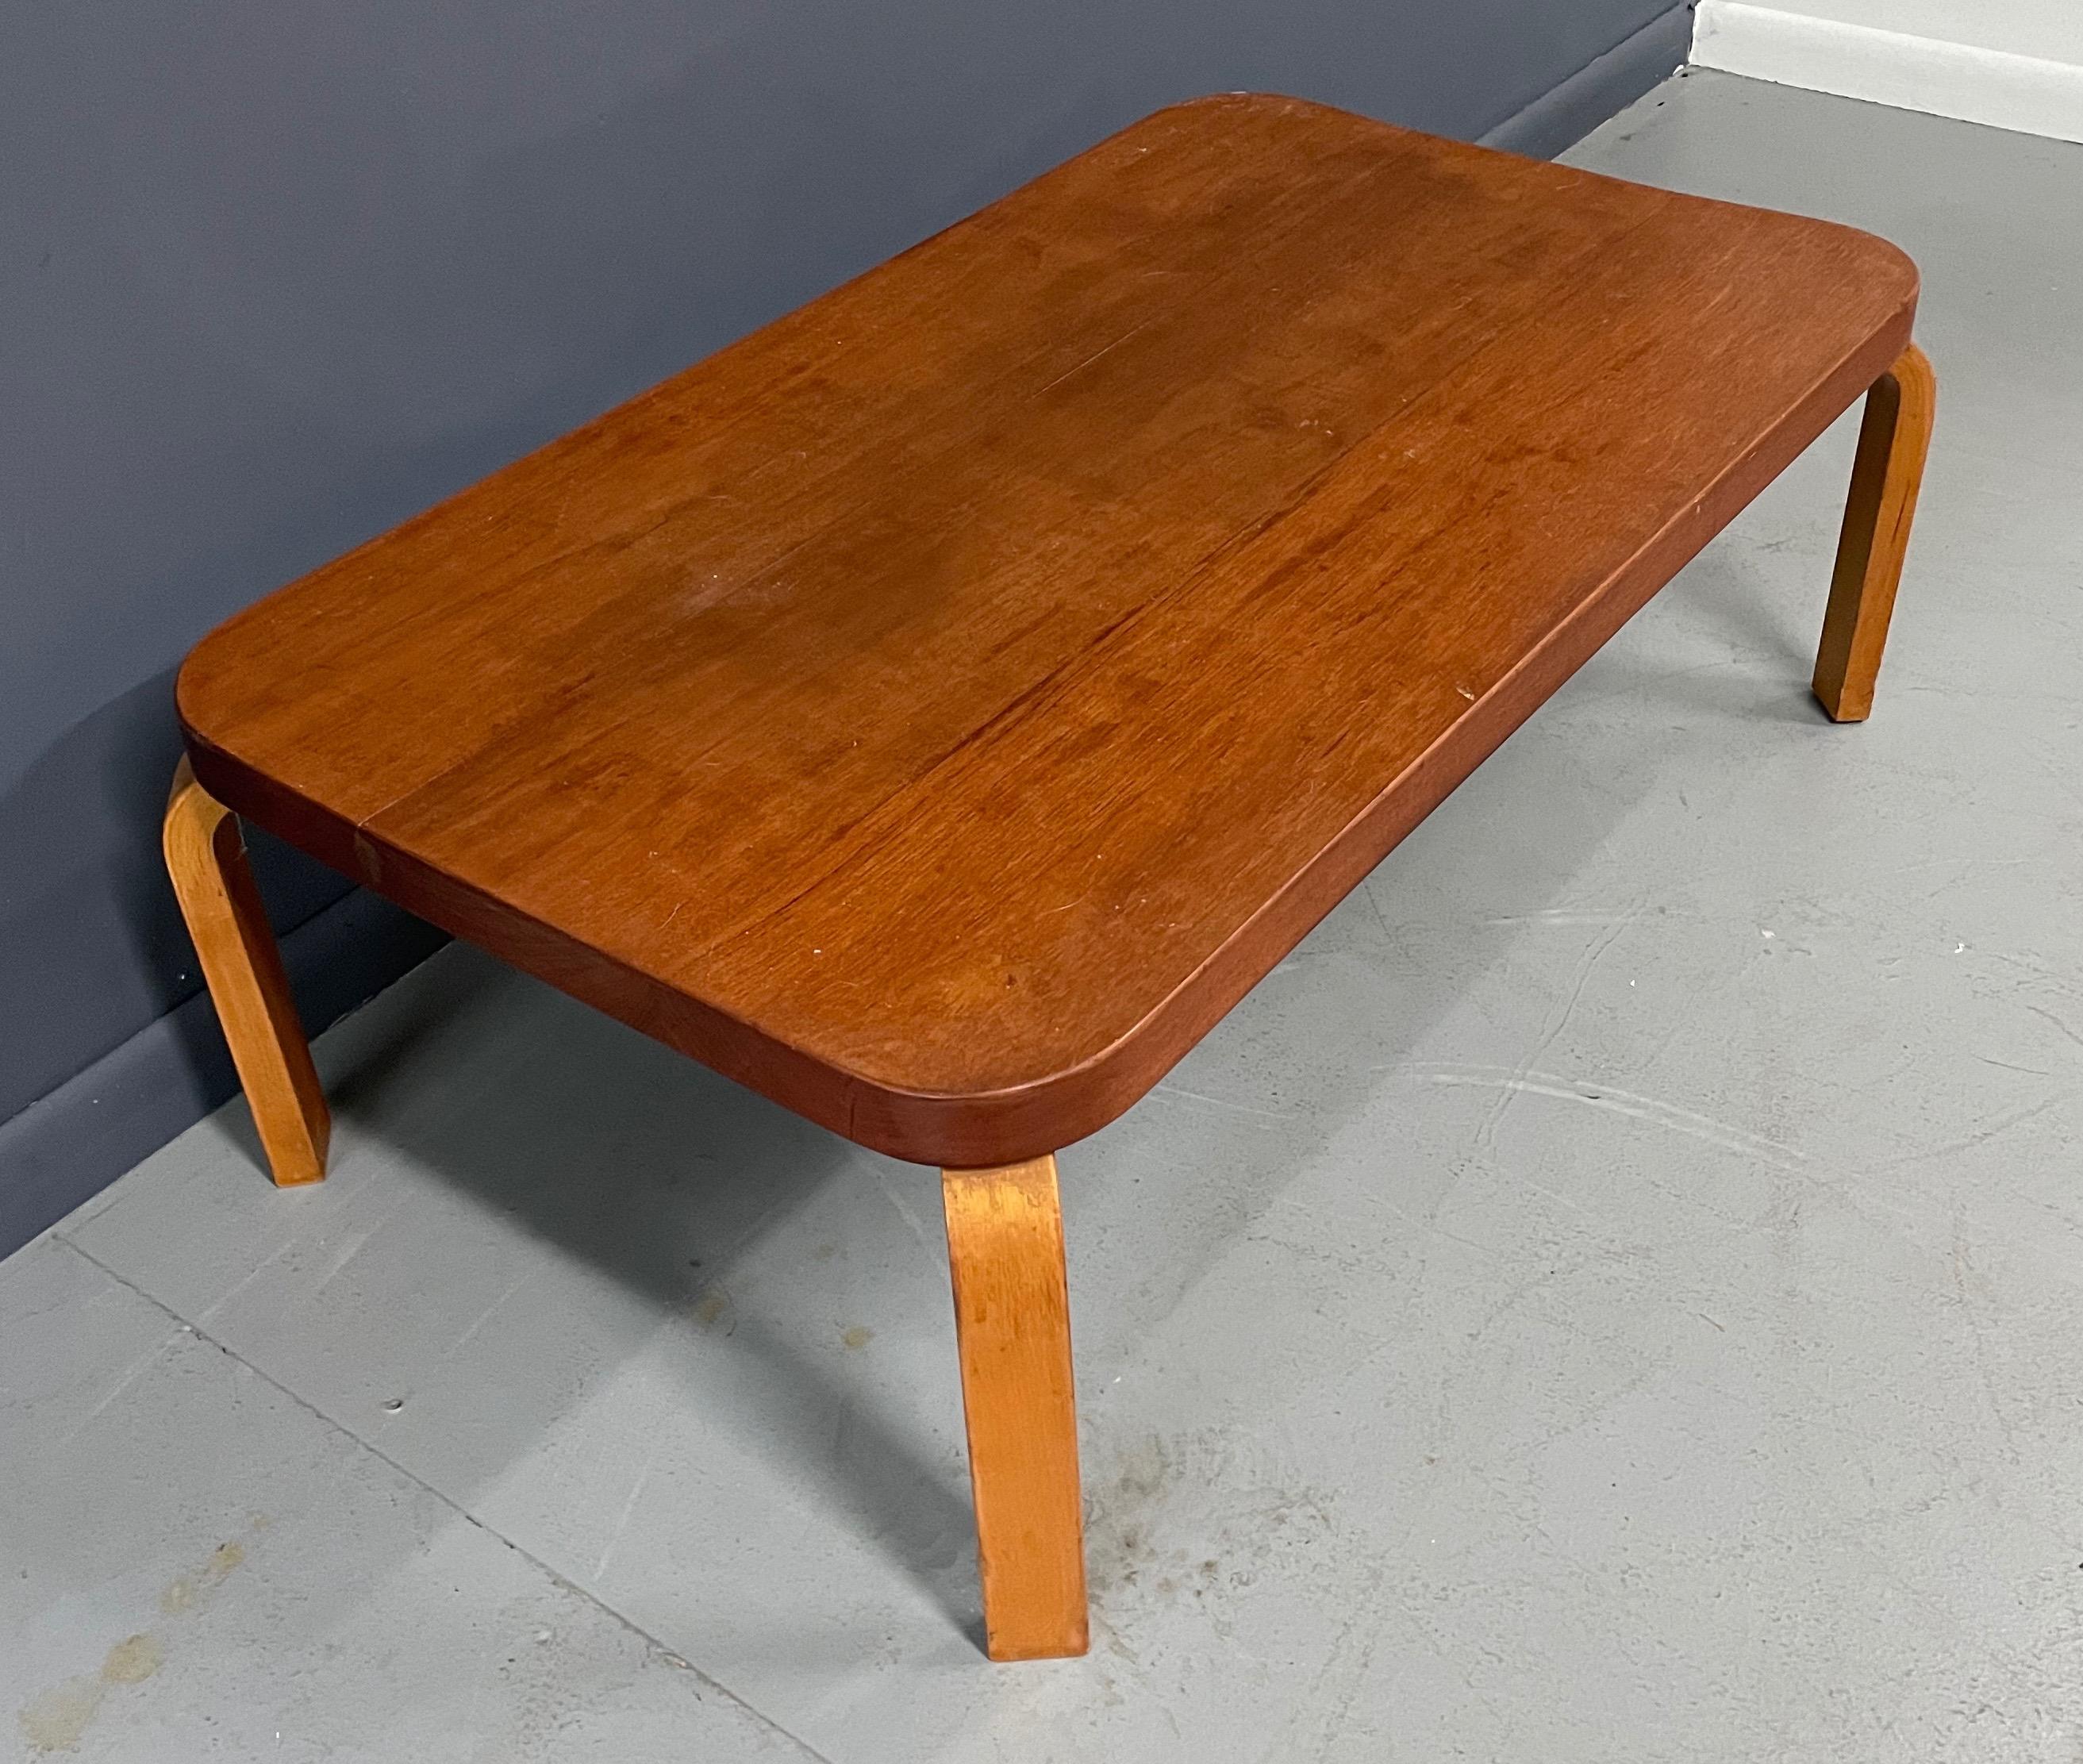 An important piece designed by Alvar Aalto for Artek placed at the Finnish Pavillion at the 1939 world's Fair. The table retains it's original customs sticker. This table is a survivor and is in original condition.